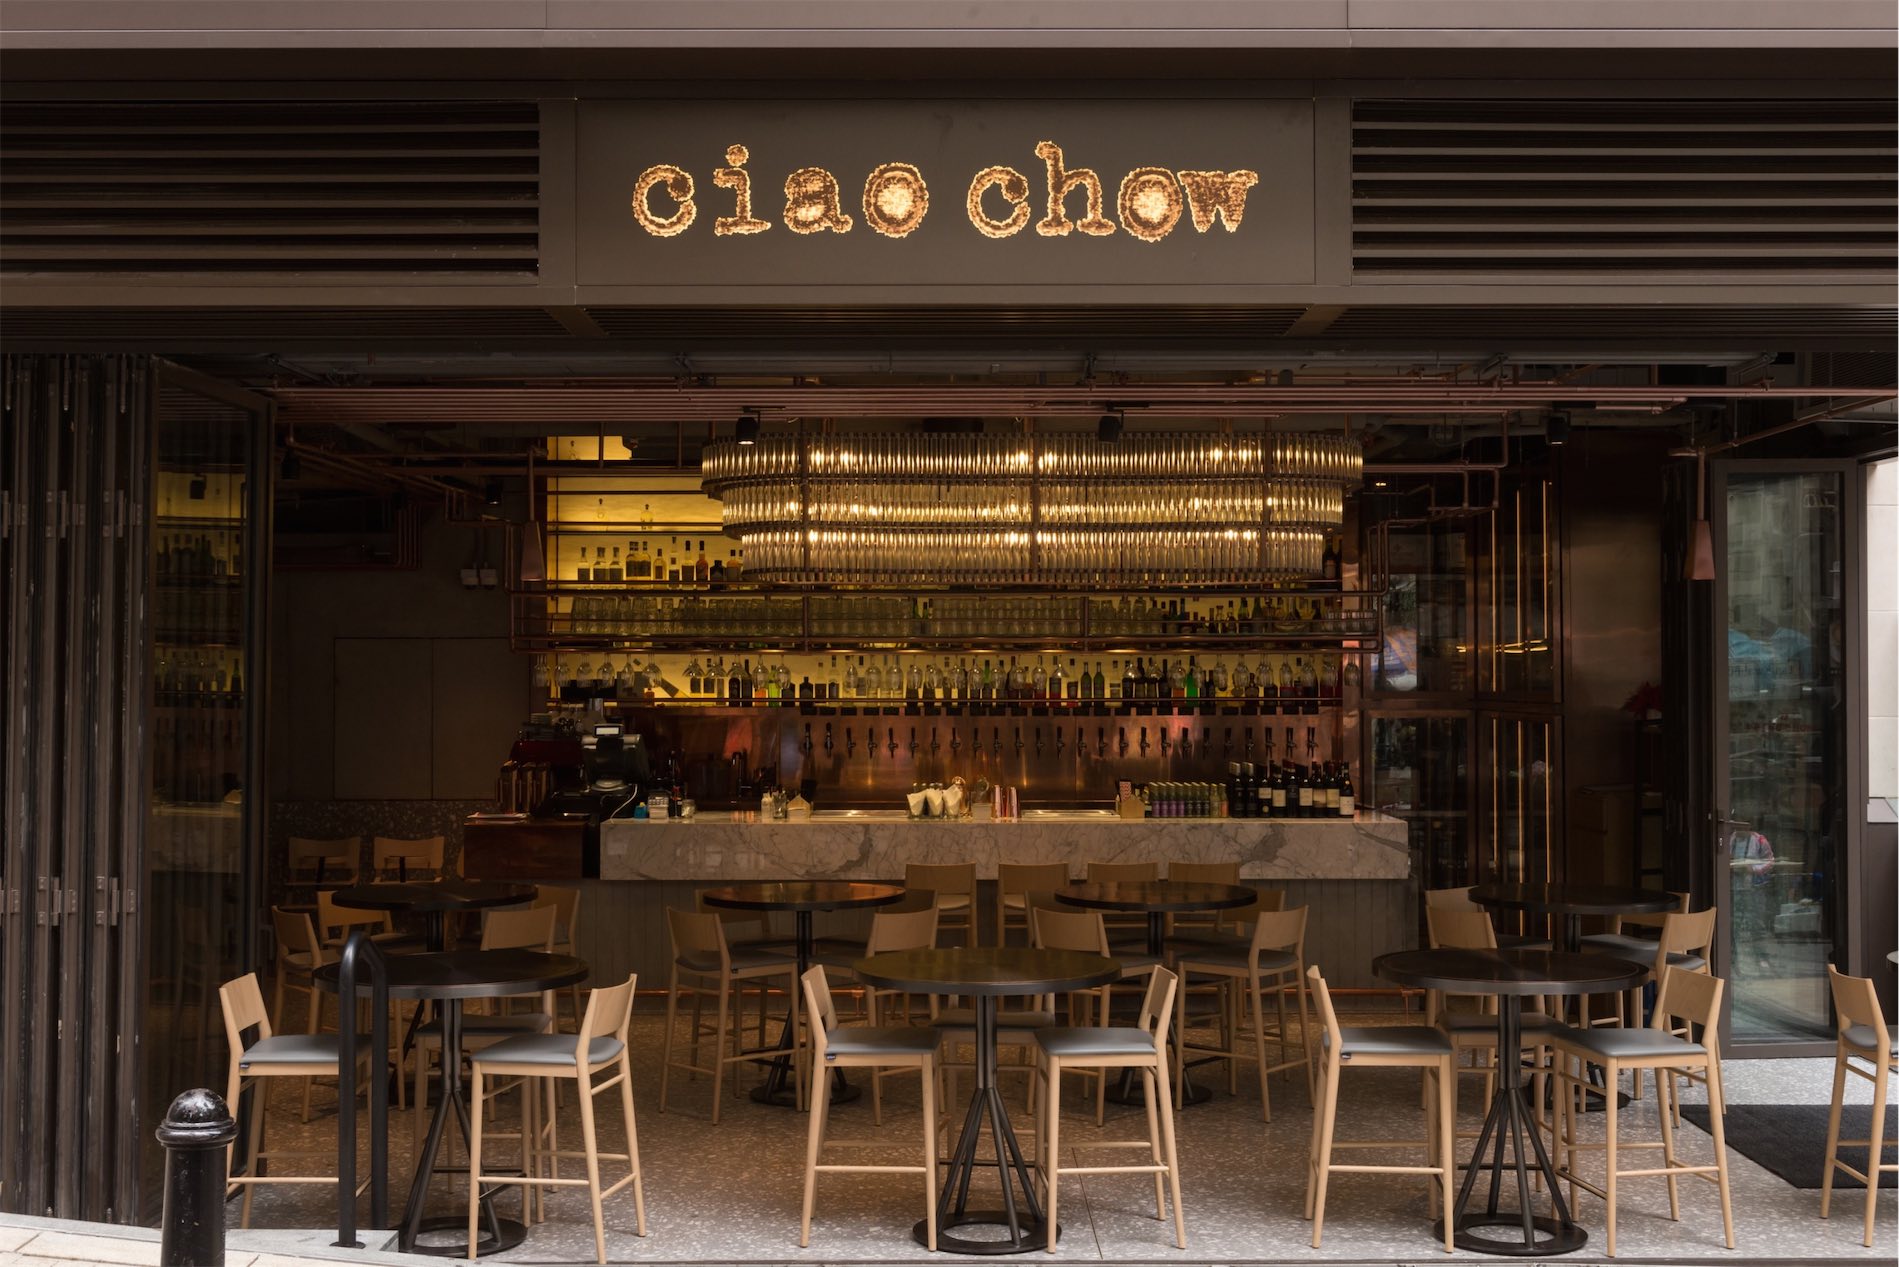 CIAO CHOW: the LKF Italian cafeteria